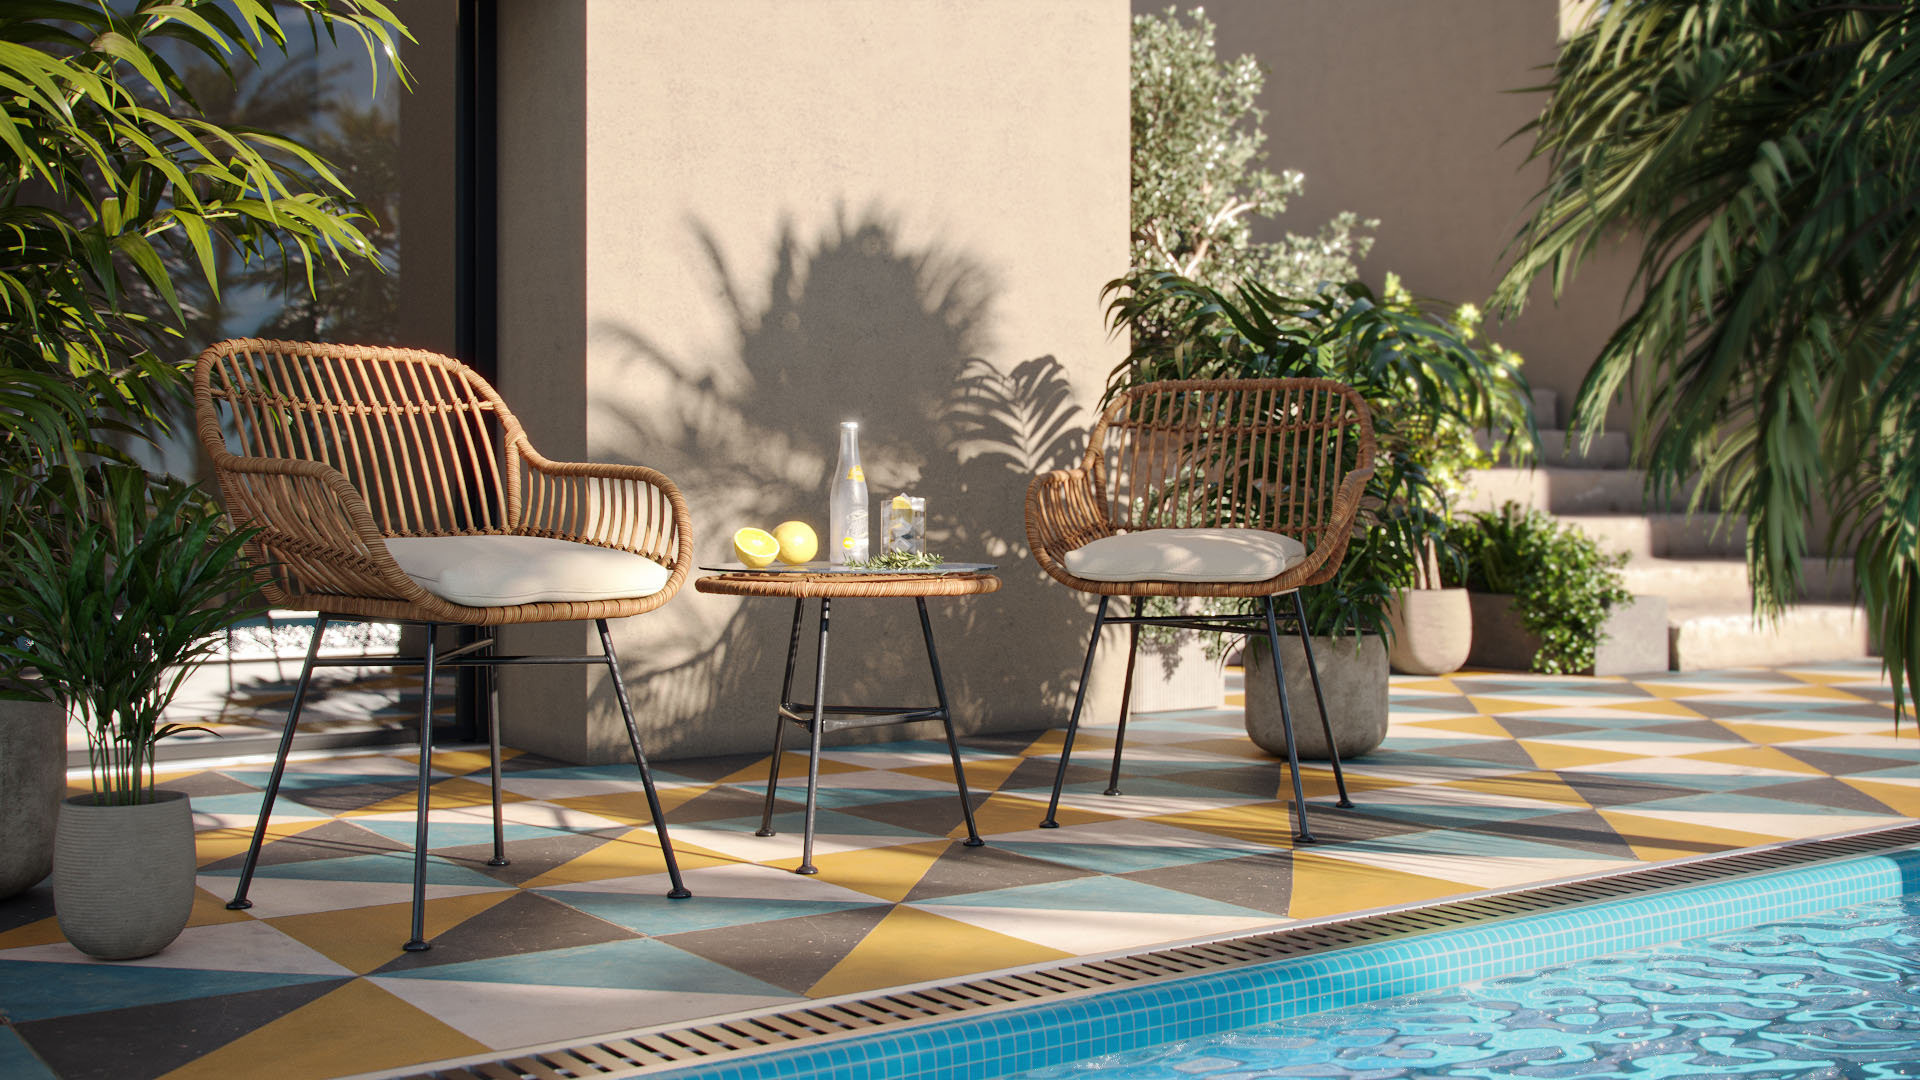 Poolside 3D Environment for Outdoor Furniture Set